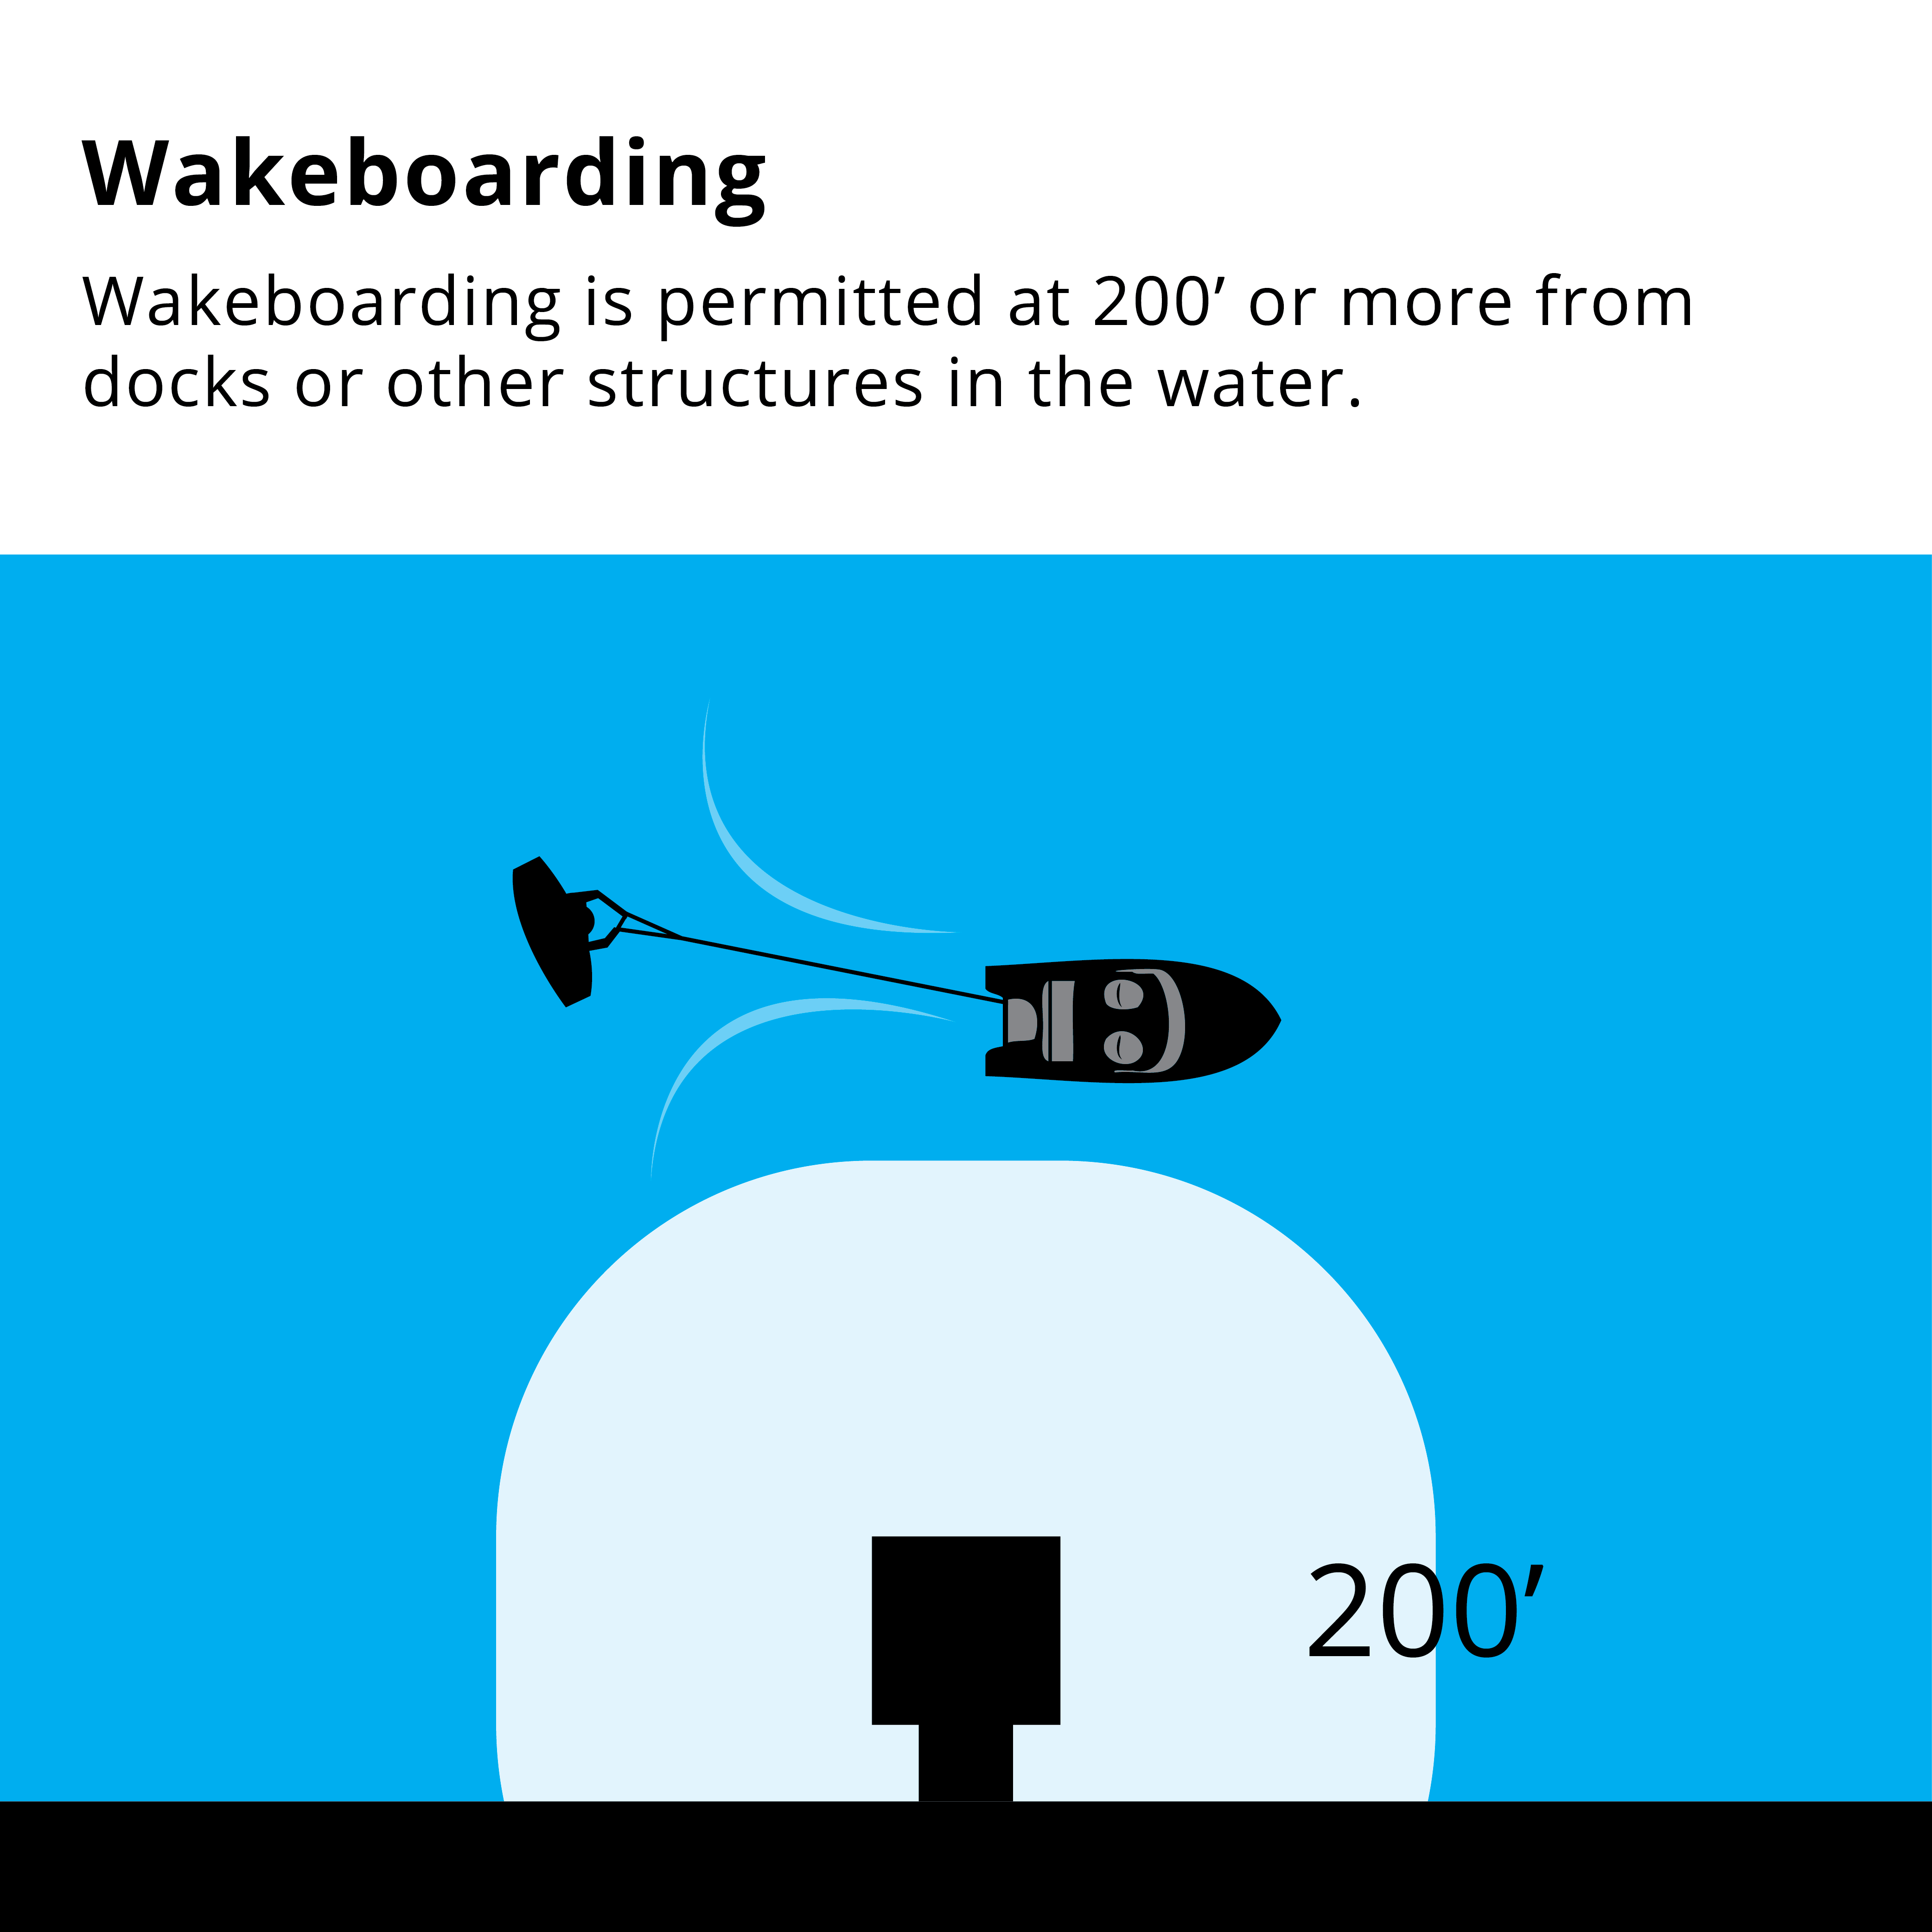 Wakeboarding is permitted 200 feet or more from docks or other structures